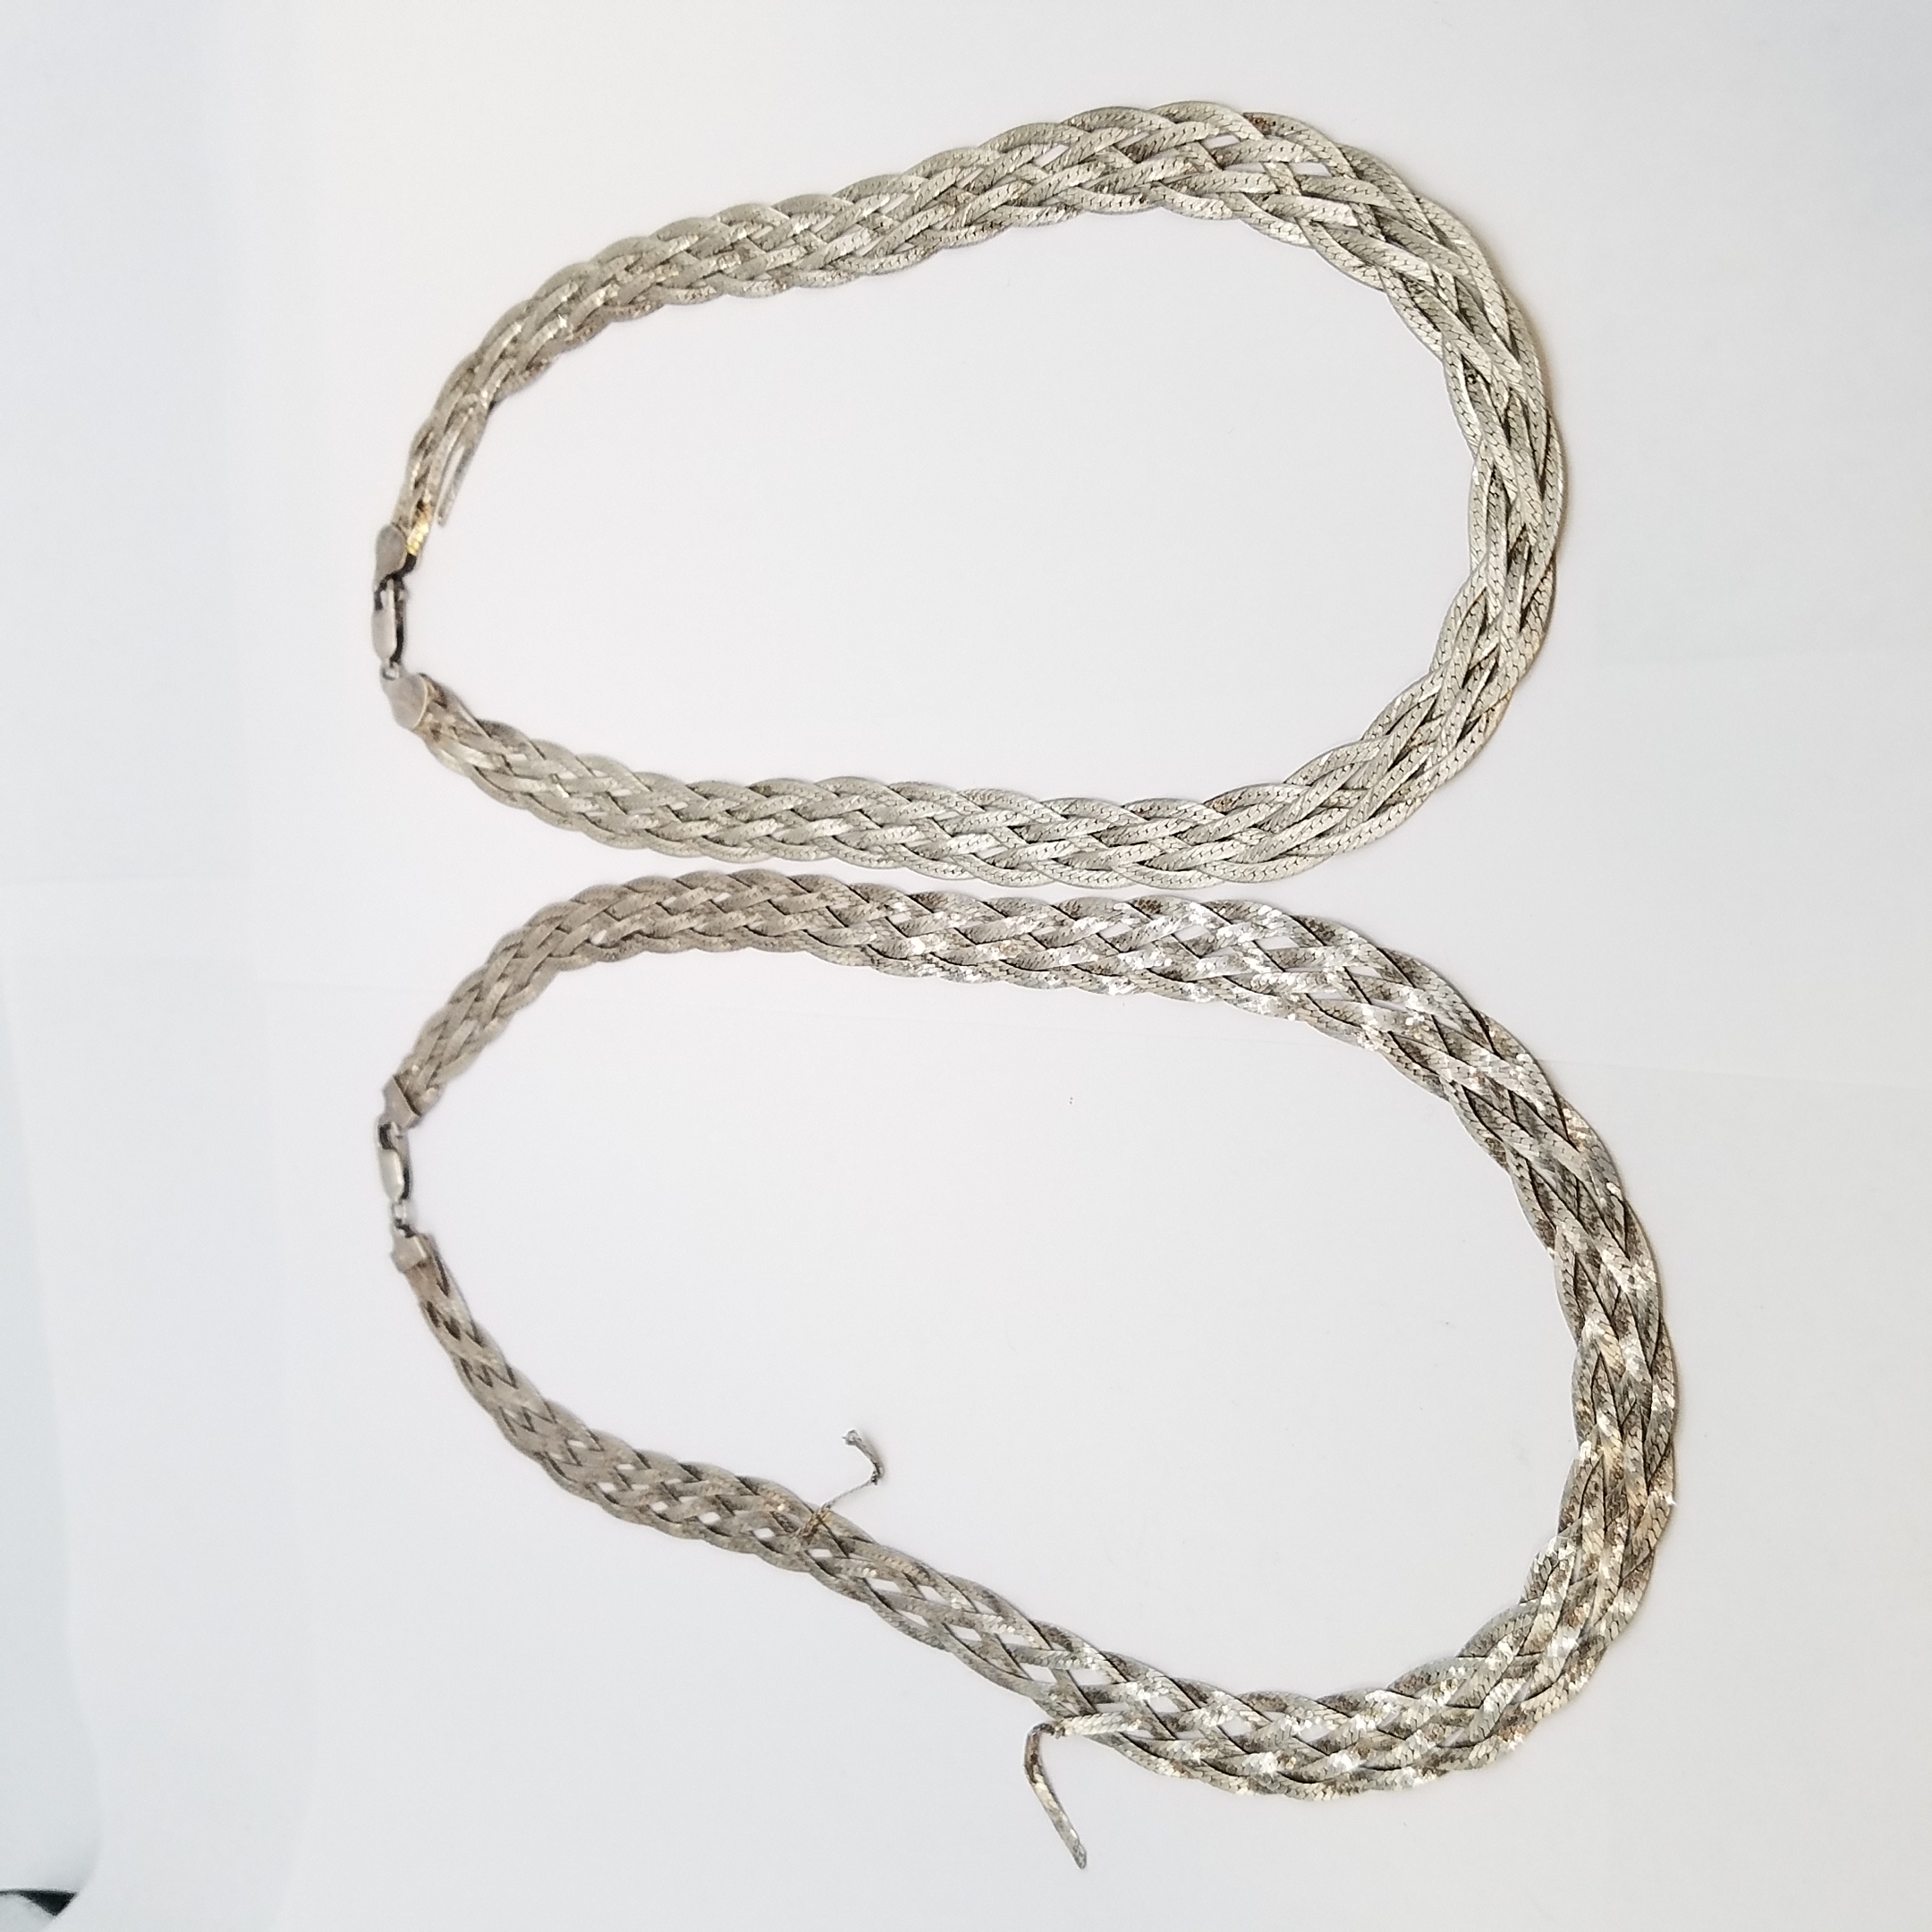 5mm Solid .925 Sterling Silver Braided Wheat Choker Chain Necklace, 16  inches - Walmart.com